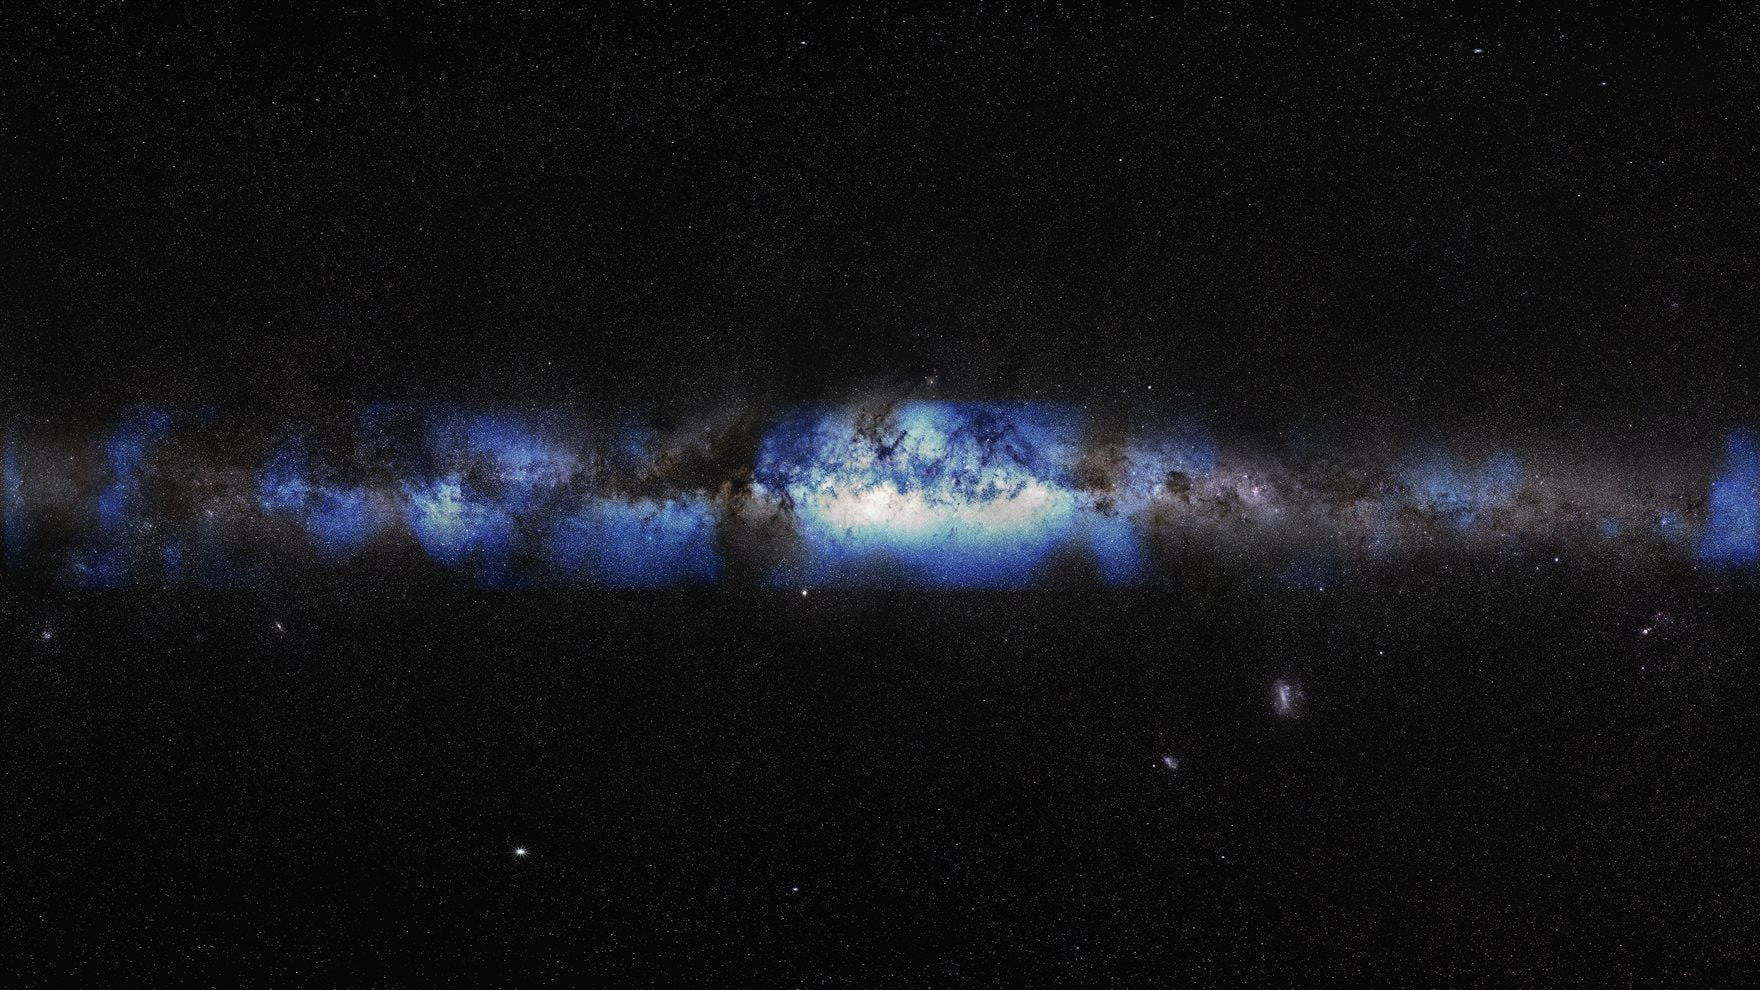 Black sky with stripe of blue and white dust in the middle representing the Milky Way Galaxy